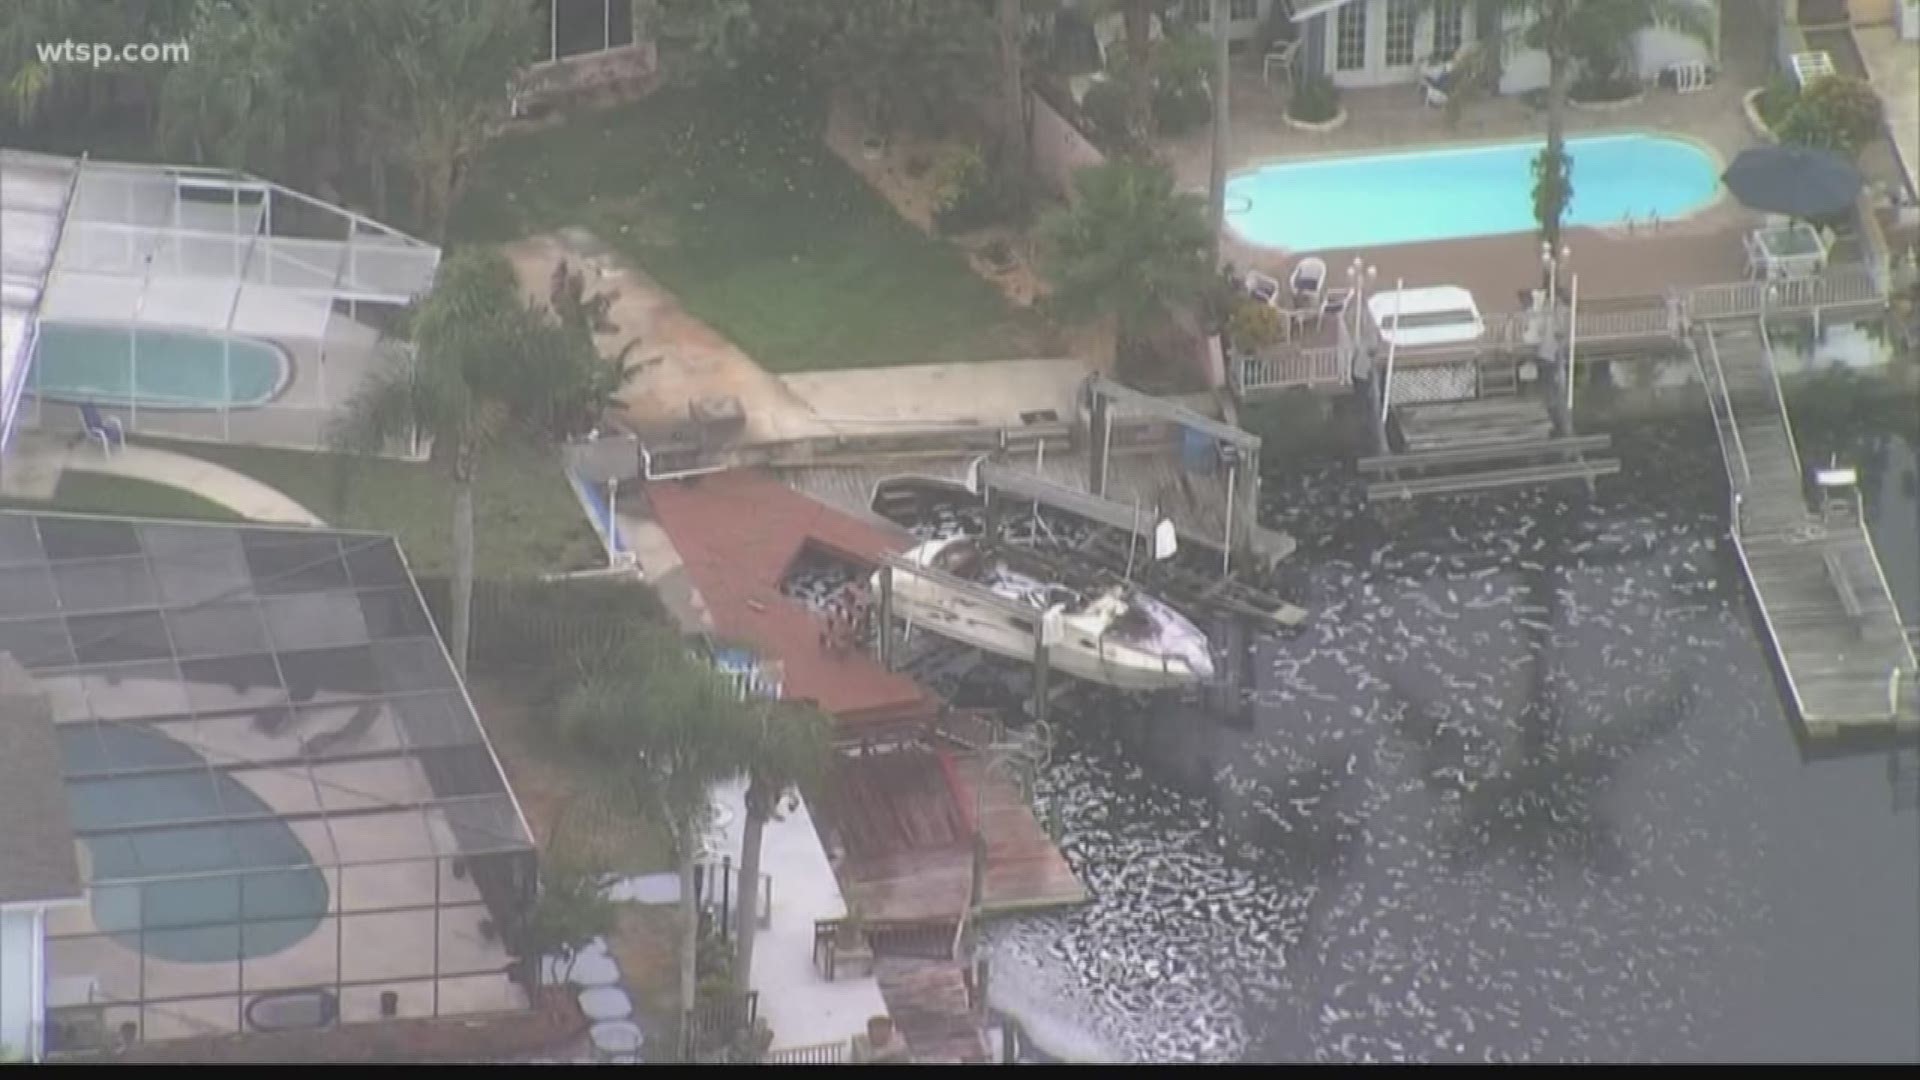 A boat on a lift somehow burst into flames, and its owner suffered serious burns, according to Pasco Fire Rescue.